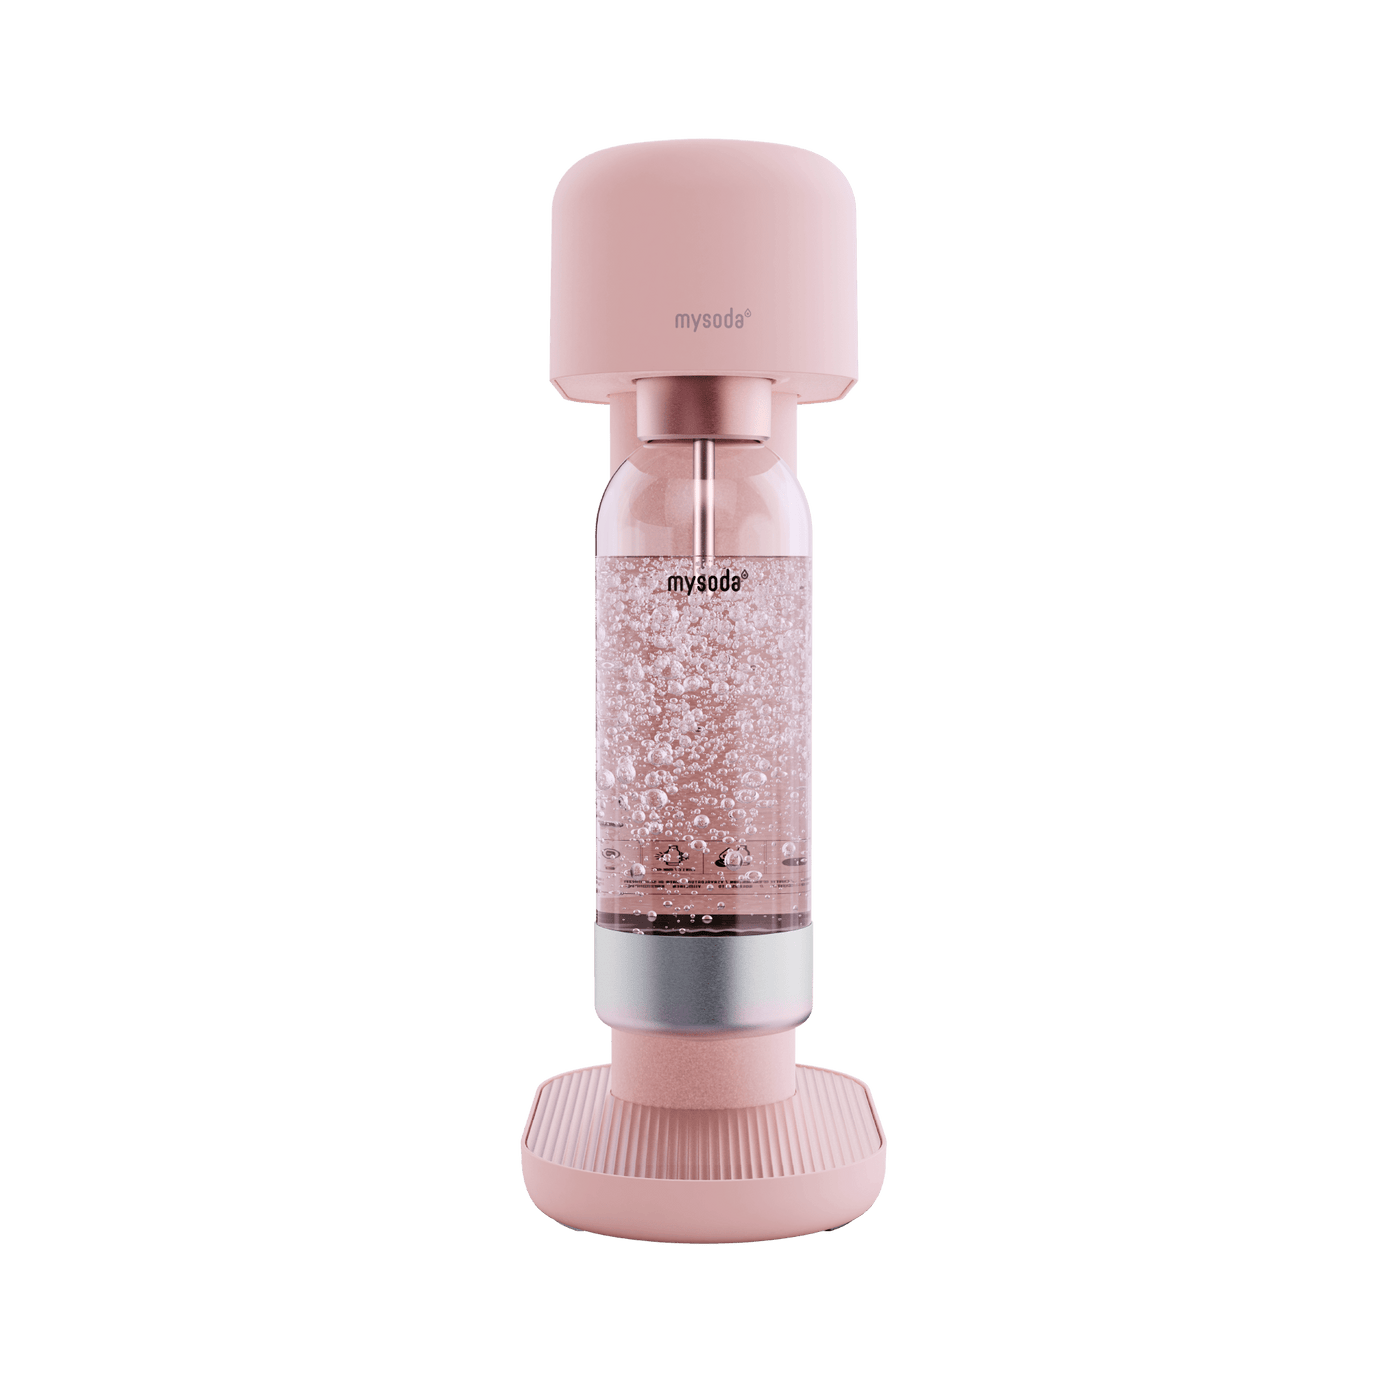 A pink Ruby 2 sparkling water maker viewed from the front#väri_pink